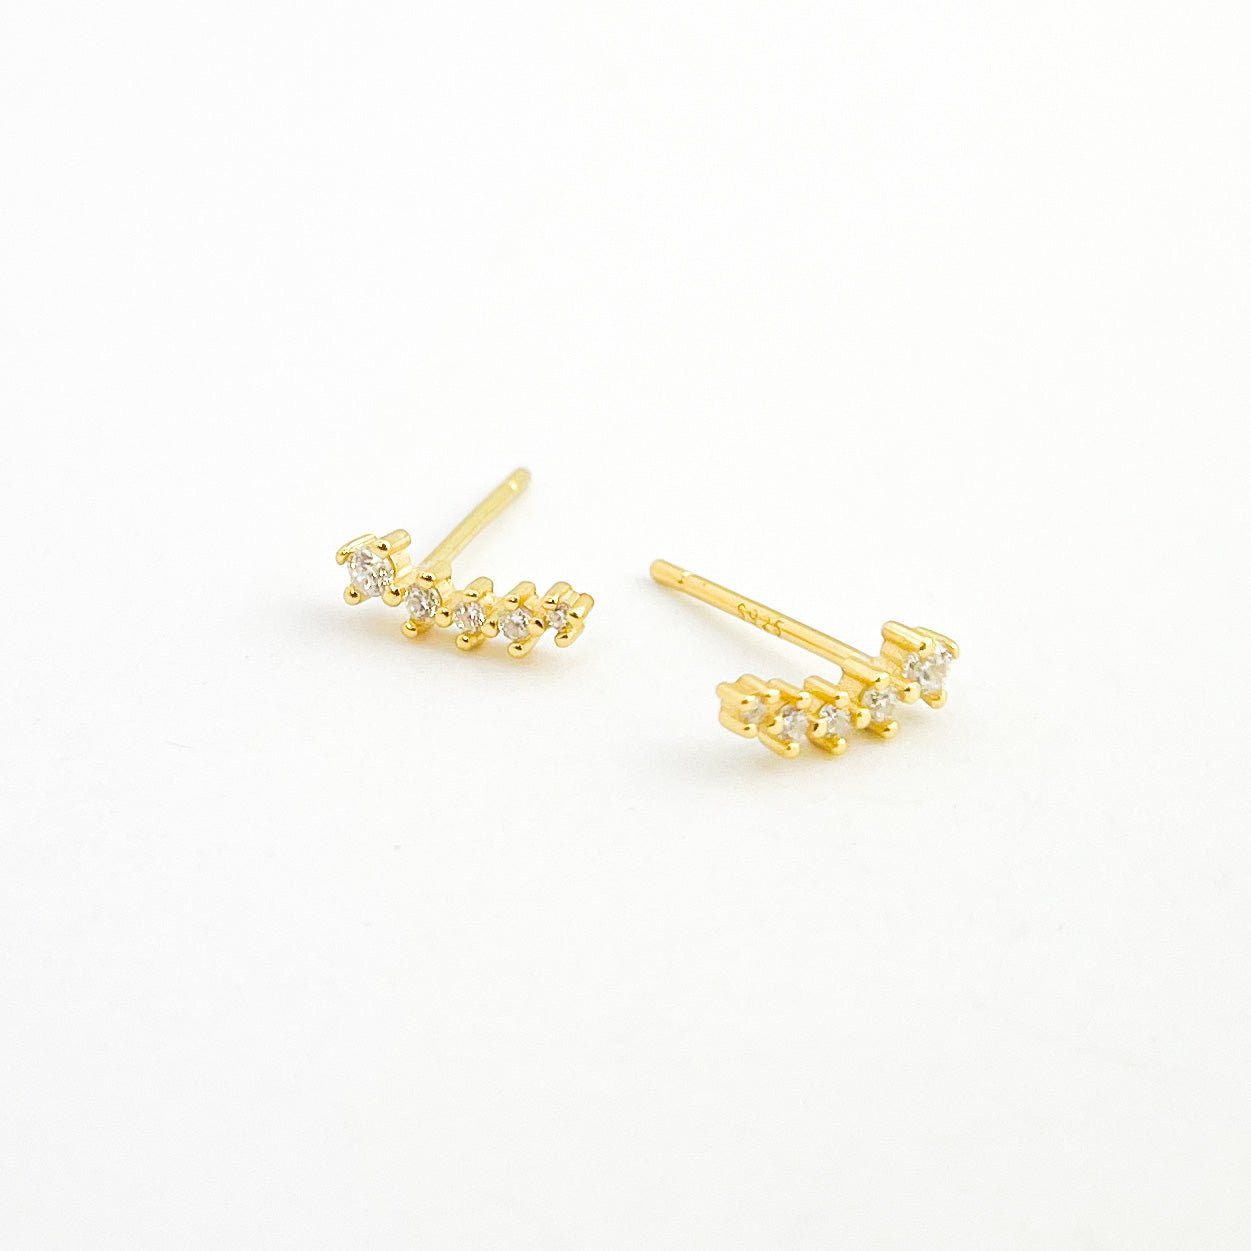 Gianna Sterling Studs in Gold - Flaire & Co.